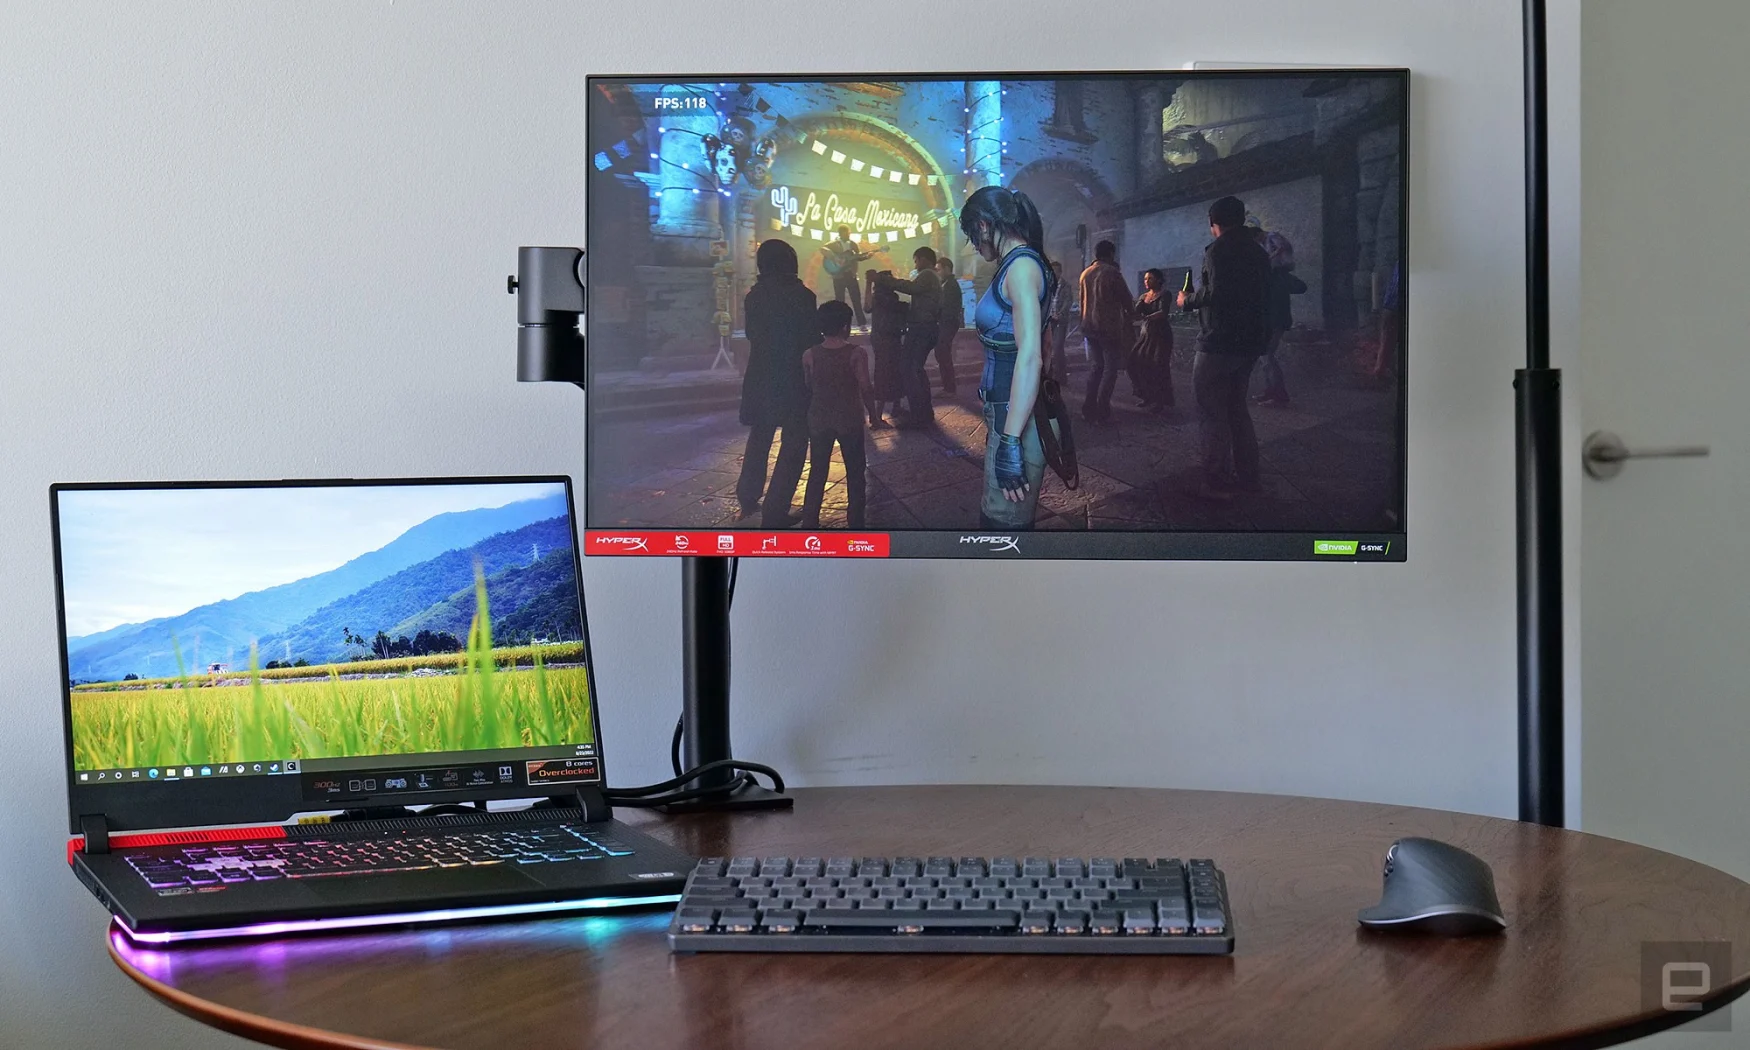 Unlike other monitors, HyperX's line of Armada gaming displays has ditched the traditional desktop stand in favor of an included monitor arm for a less cluttered and more adjustable setup. 